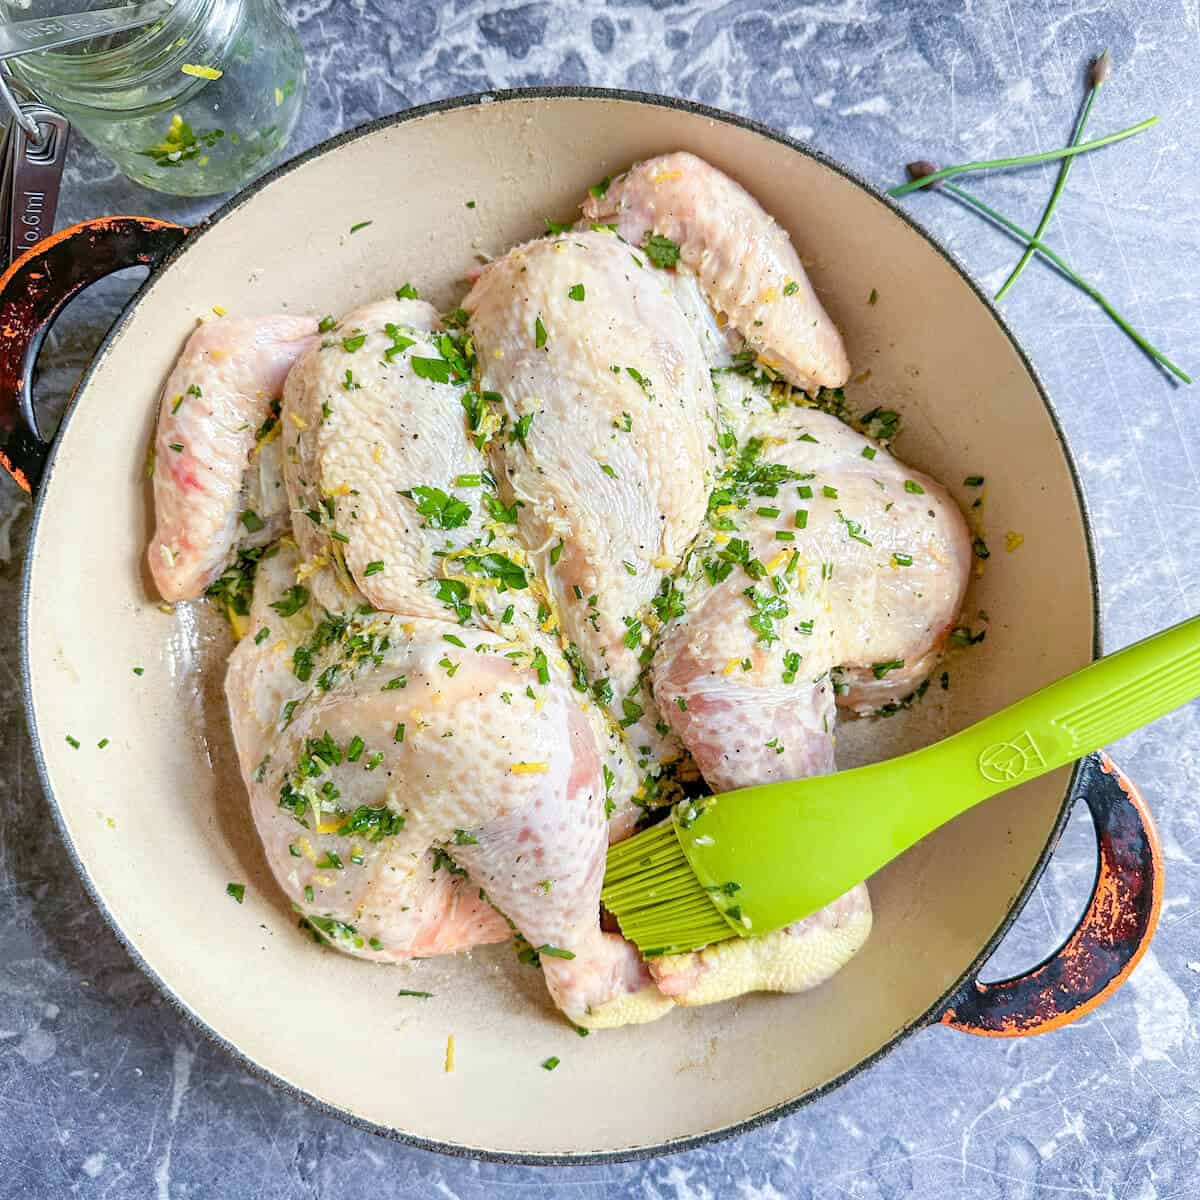 A spatchcock chicken being brushed with citrus herb marinade before roasting.